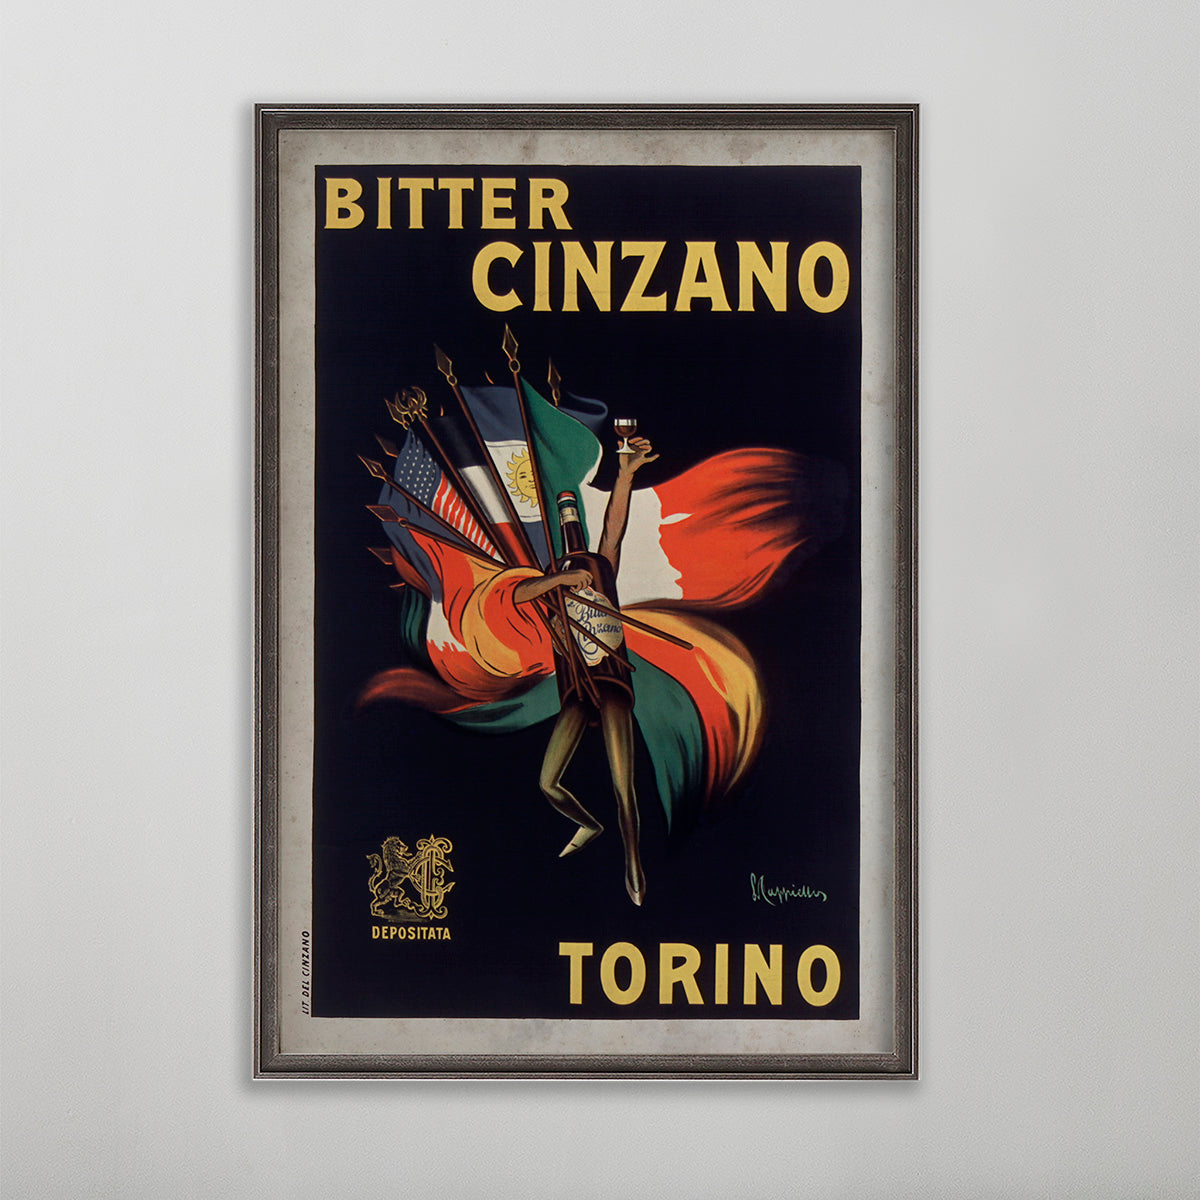 Bitter cinzano torino poster. Vintage poster advertisement art. vintage poster wall art by leonetto cappiello.